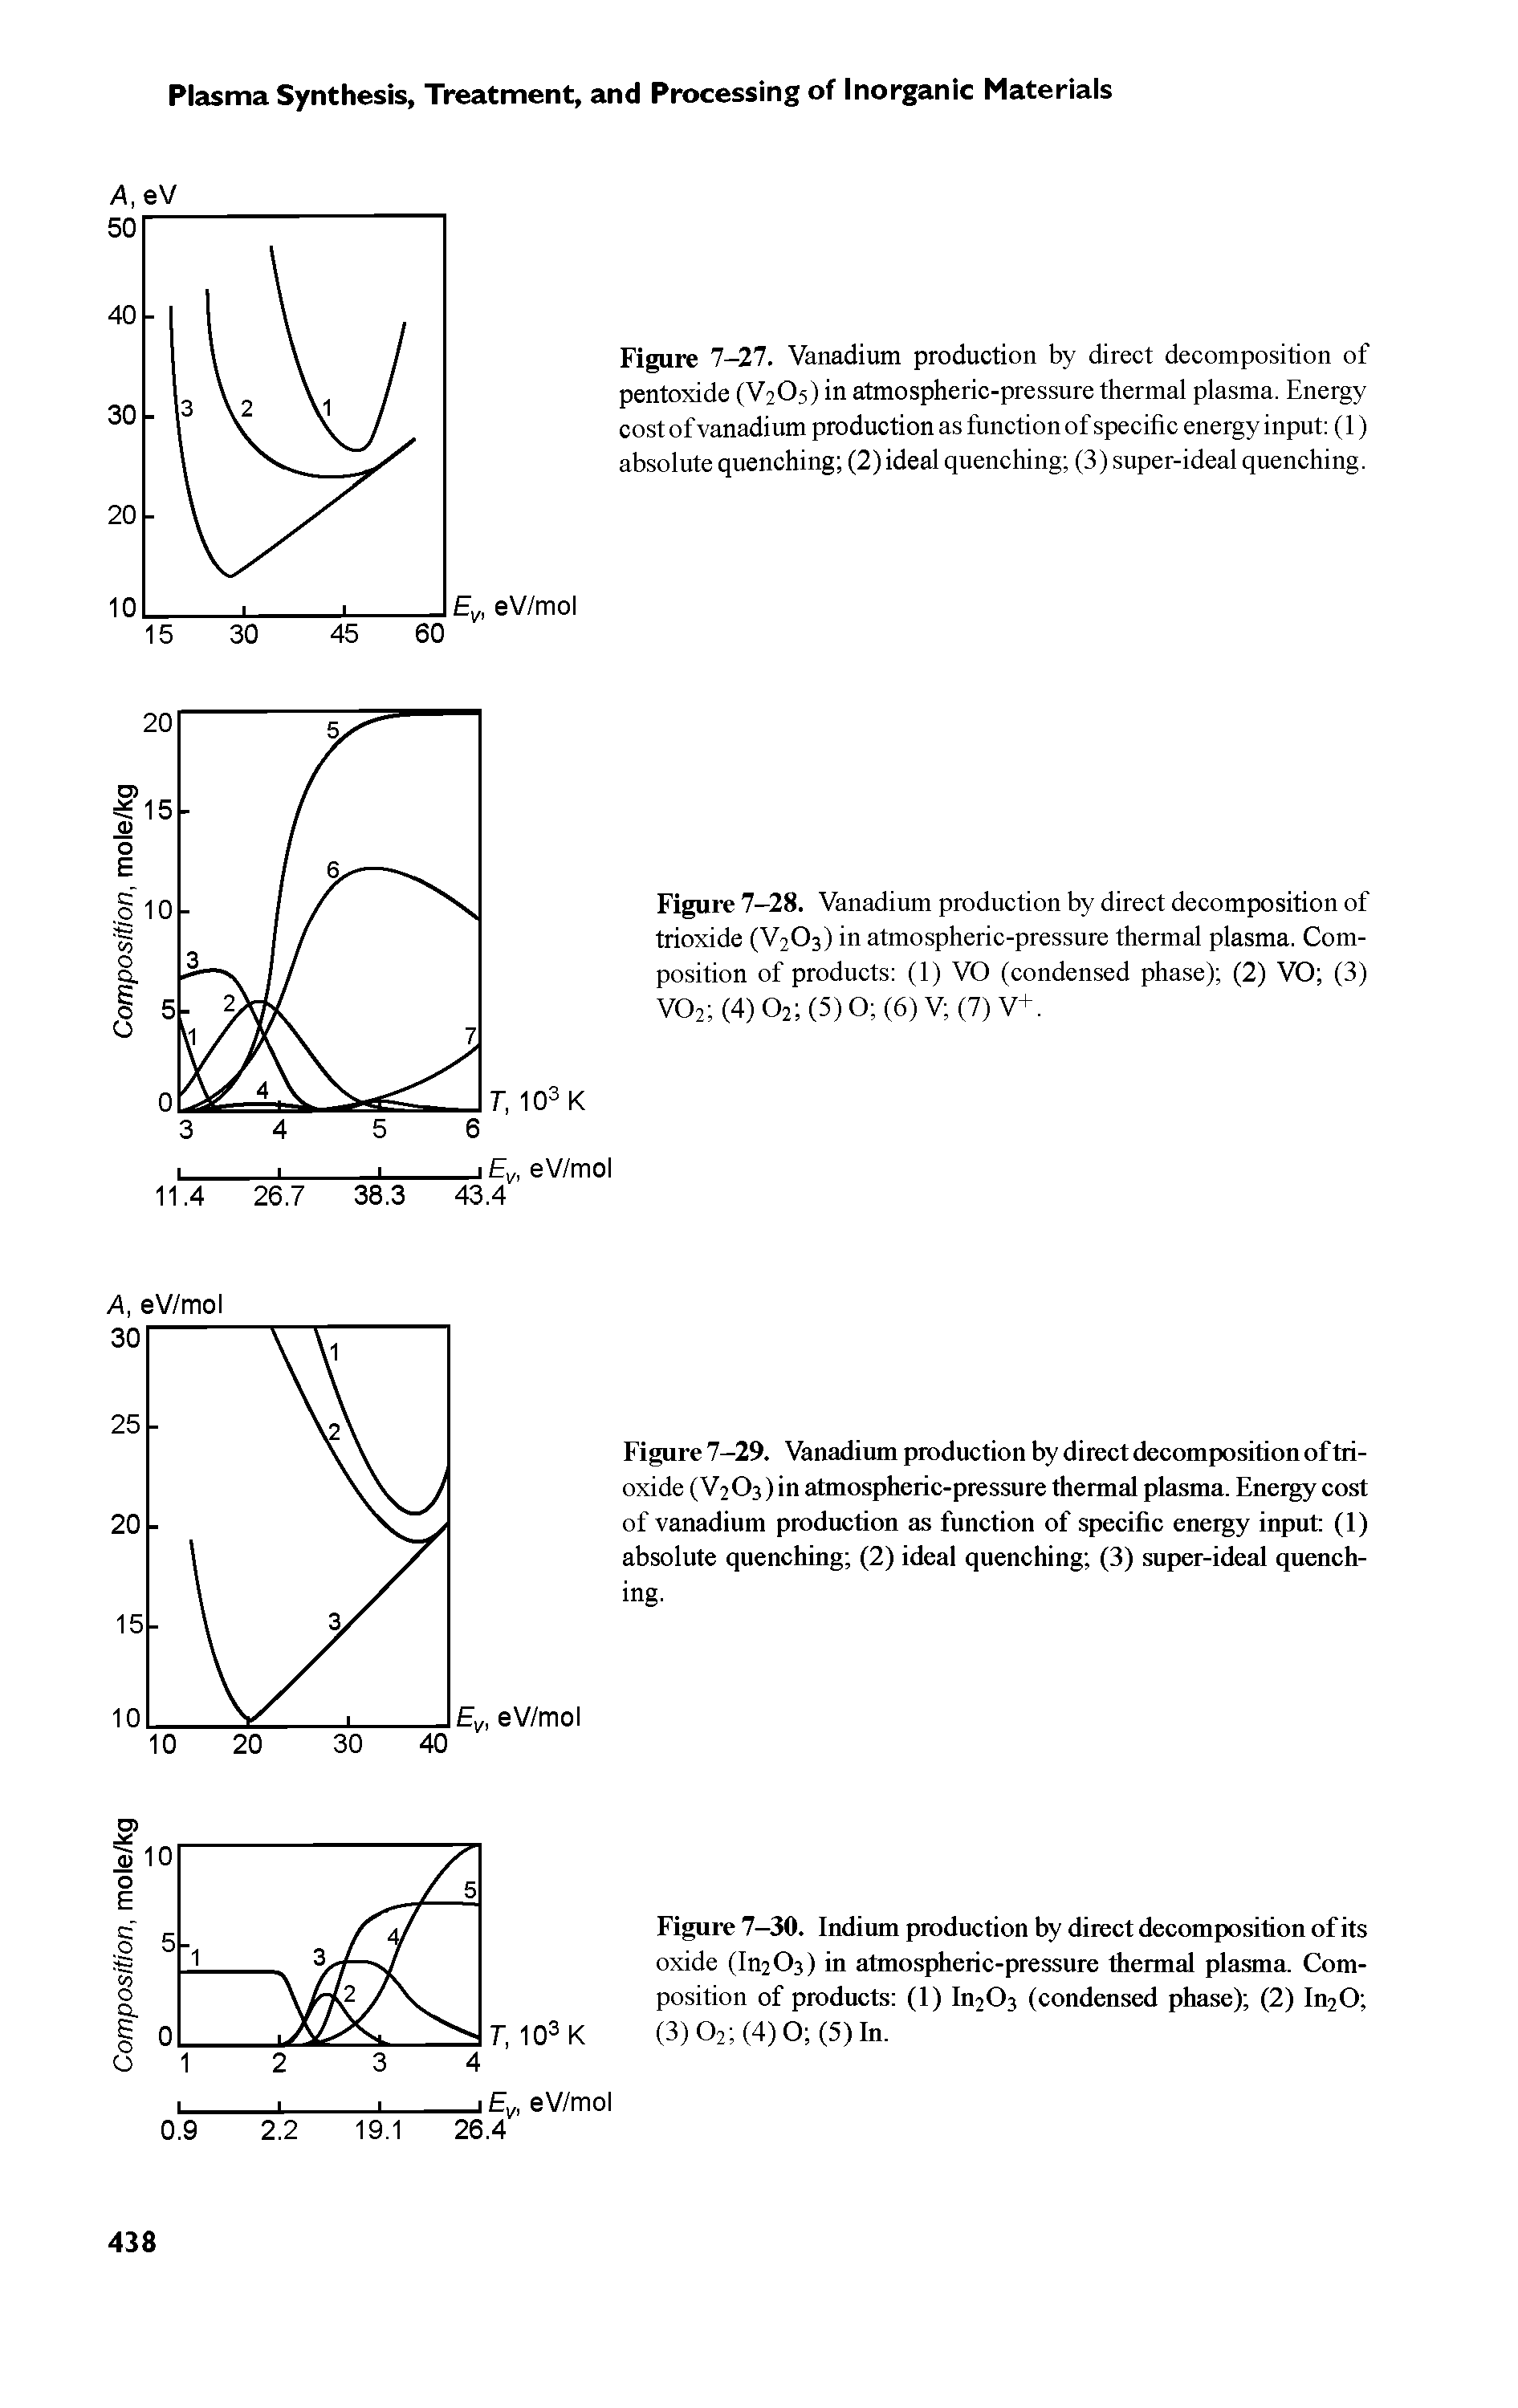 Figure 7-29. Vanadium production by direct decomposition of trioxide (V2O3) in atmospheric-pressure thermal plasma. Energy cost of vanadium production as function of specific energy input (1) absolute quenching (2) ideal quenching (3) super-ideal quenching.